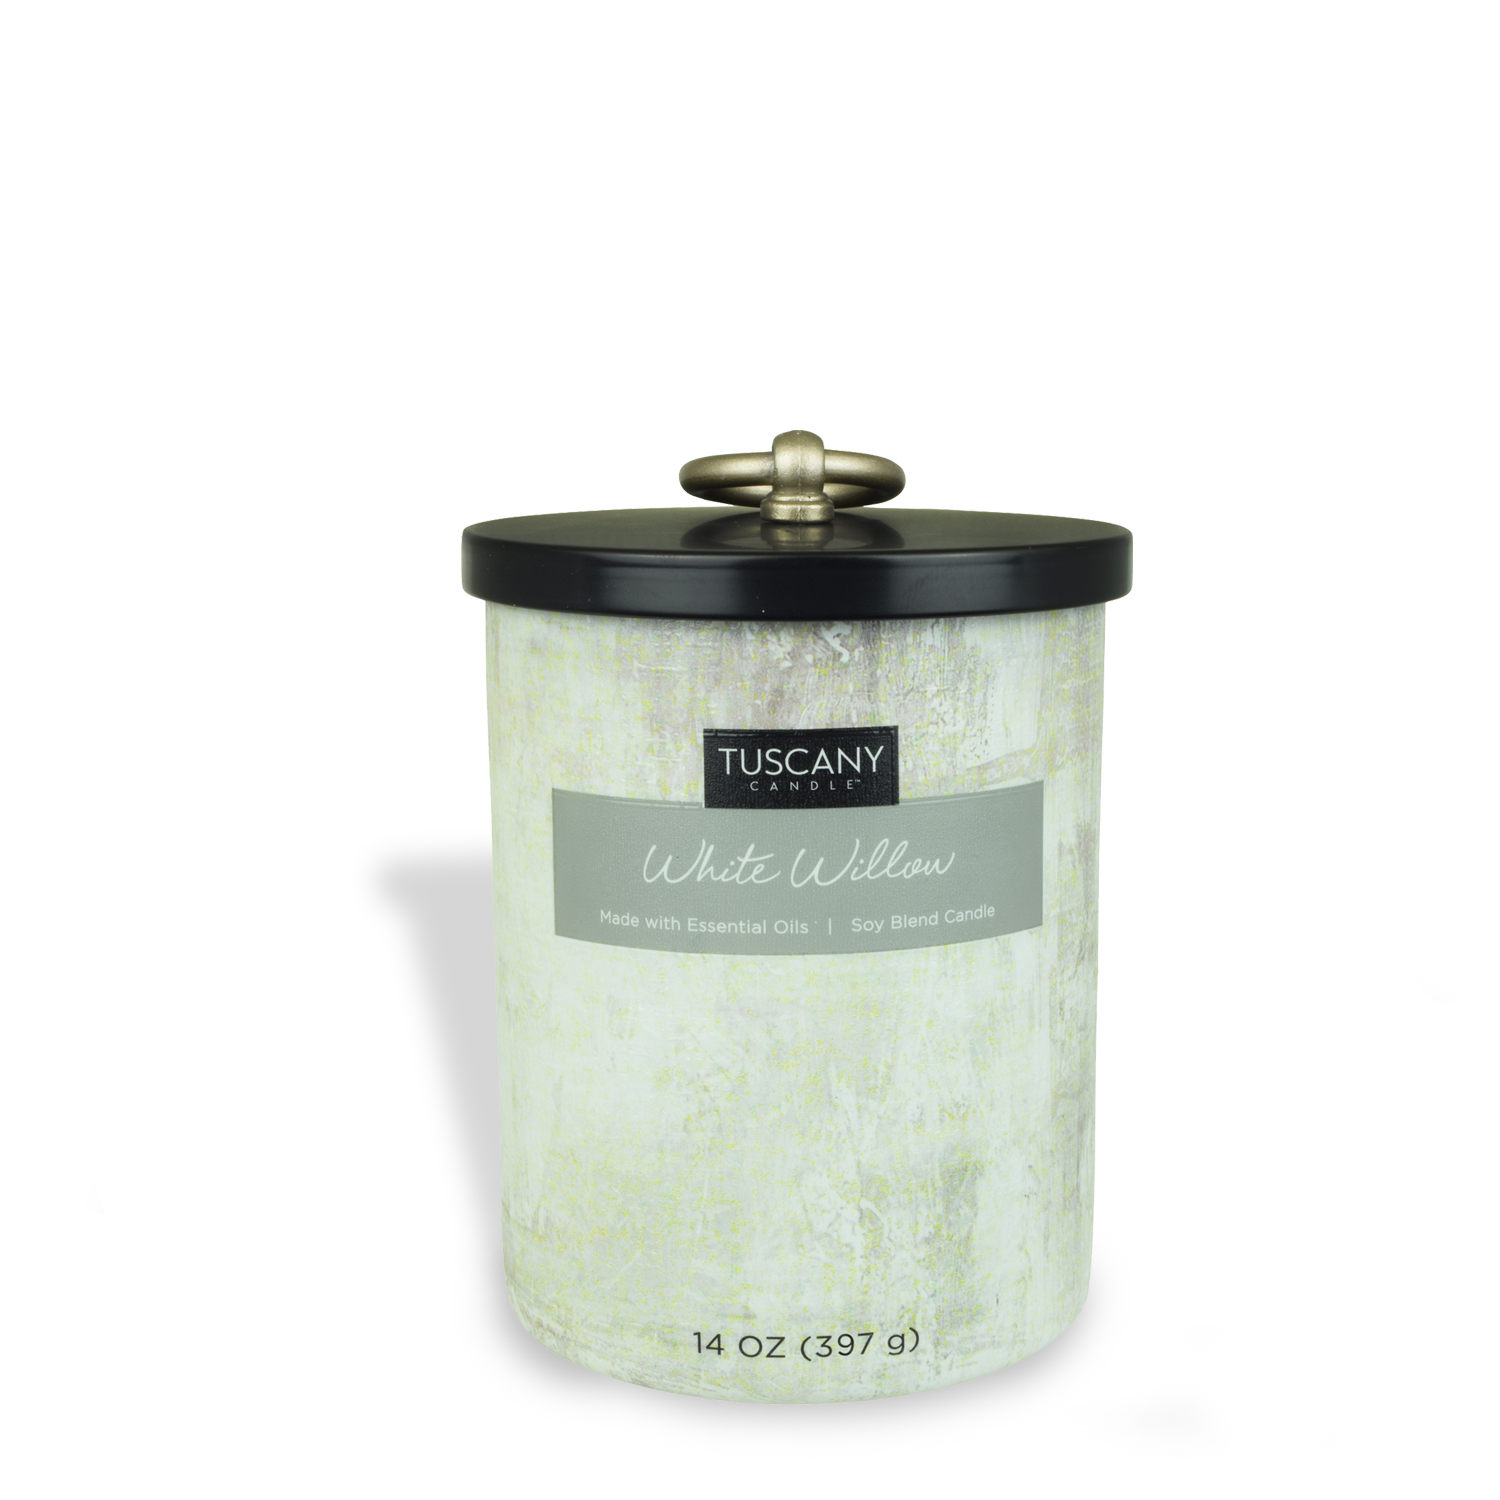 A White Willow Scented Jar Candle (14 oz) in the Tuscany Candle Home Décor Collection, emitting soothing FRAGRANCE NOTES.